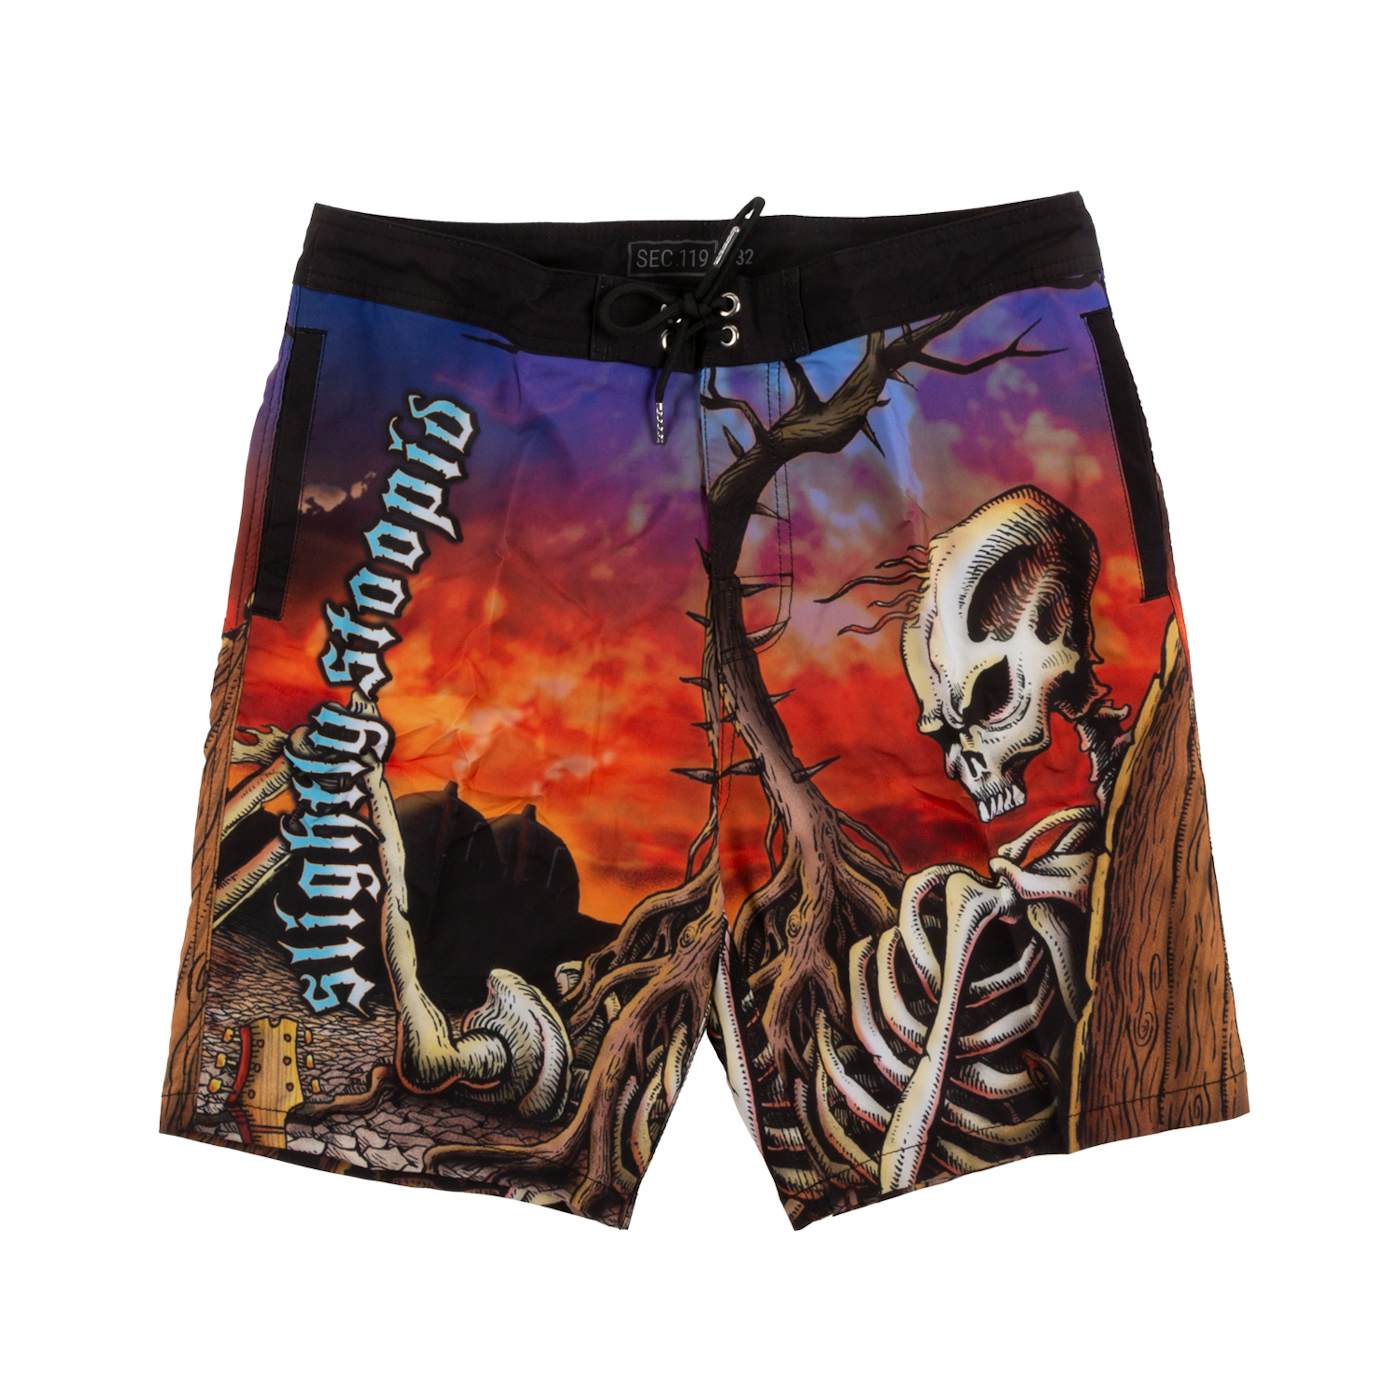 Slightly Stoopid x Section 119 Closer To The Sun Board Shorts